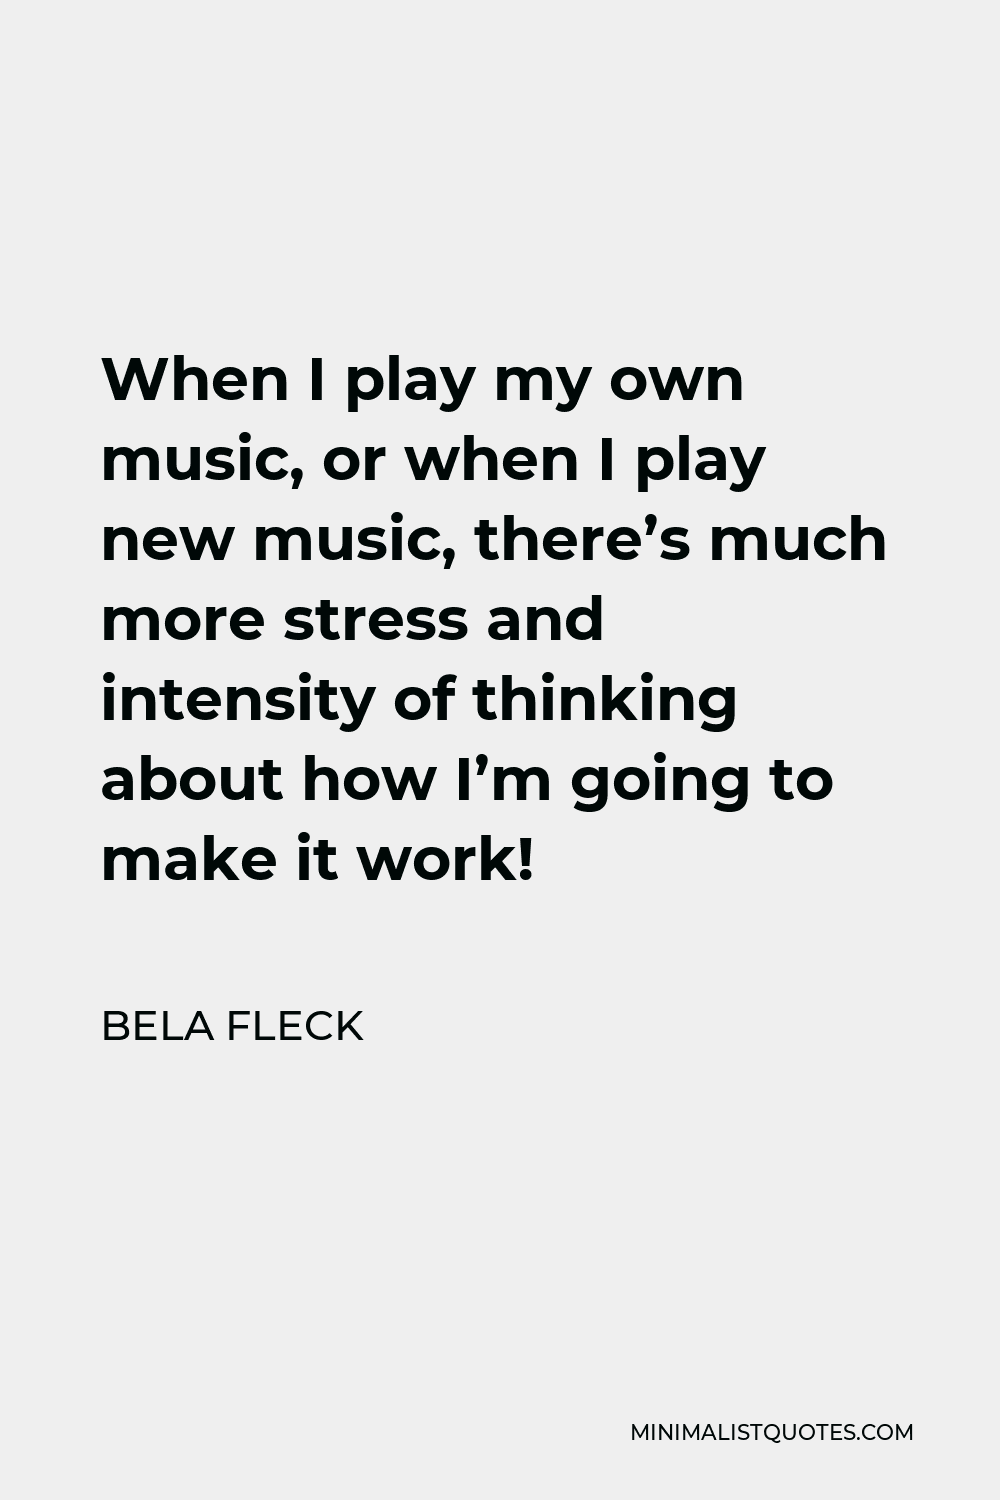 Bela Fleck Quote - When I play my own music, or when I play new music, there’s much more stress and intensity of thinking about how I’m going to make it work!